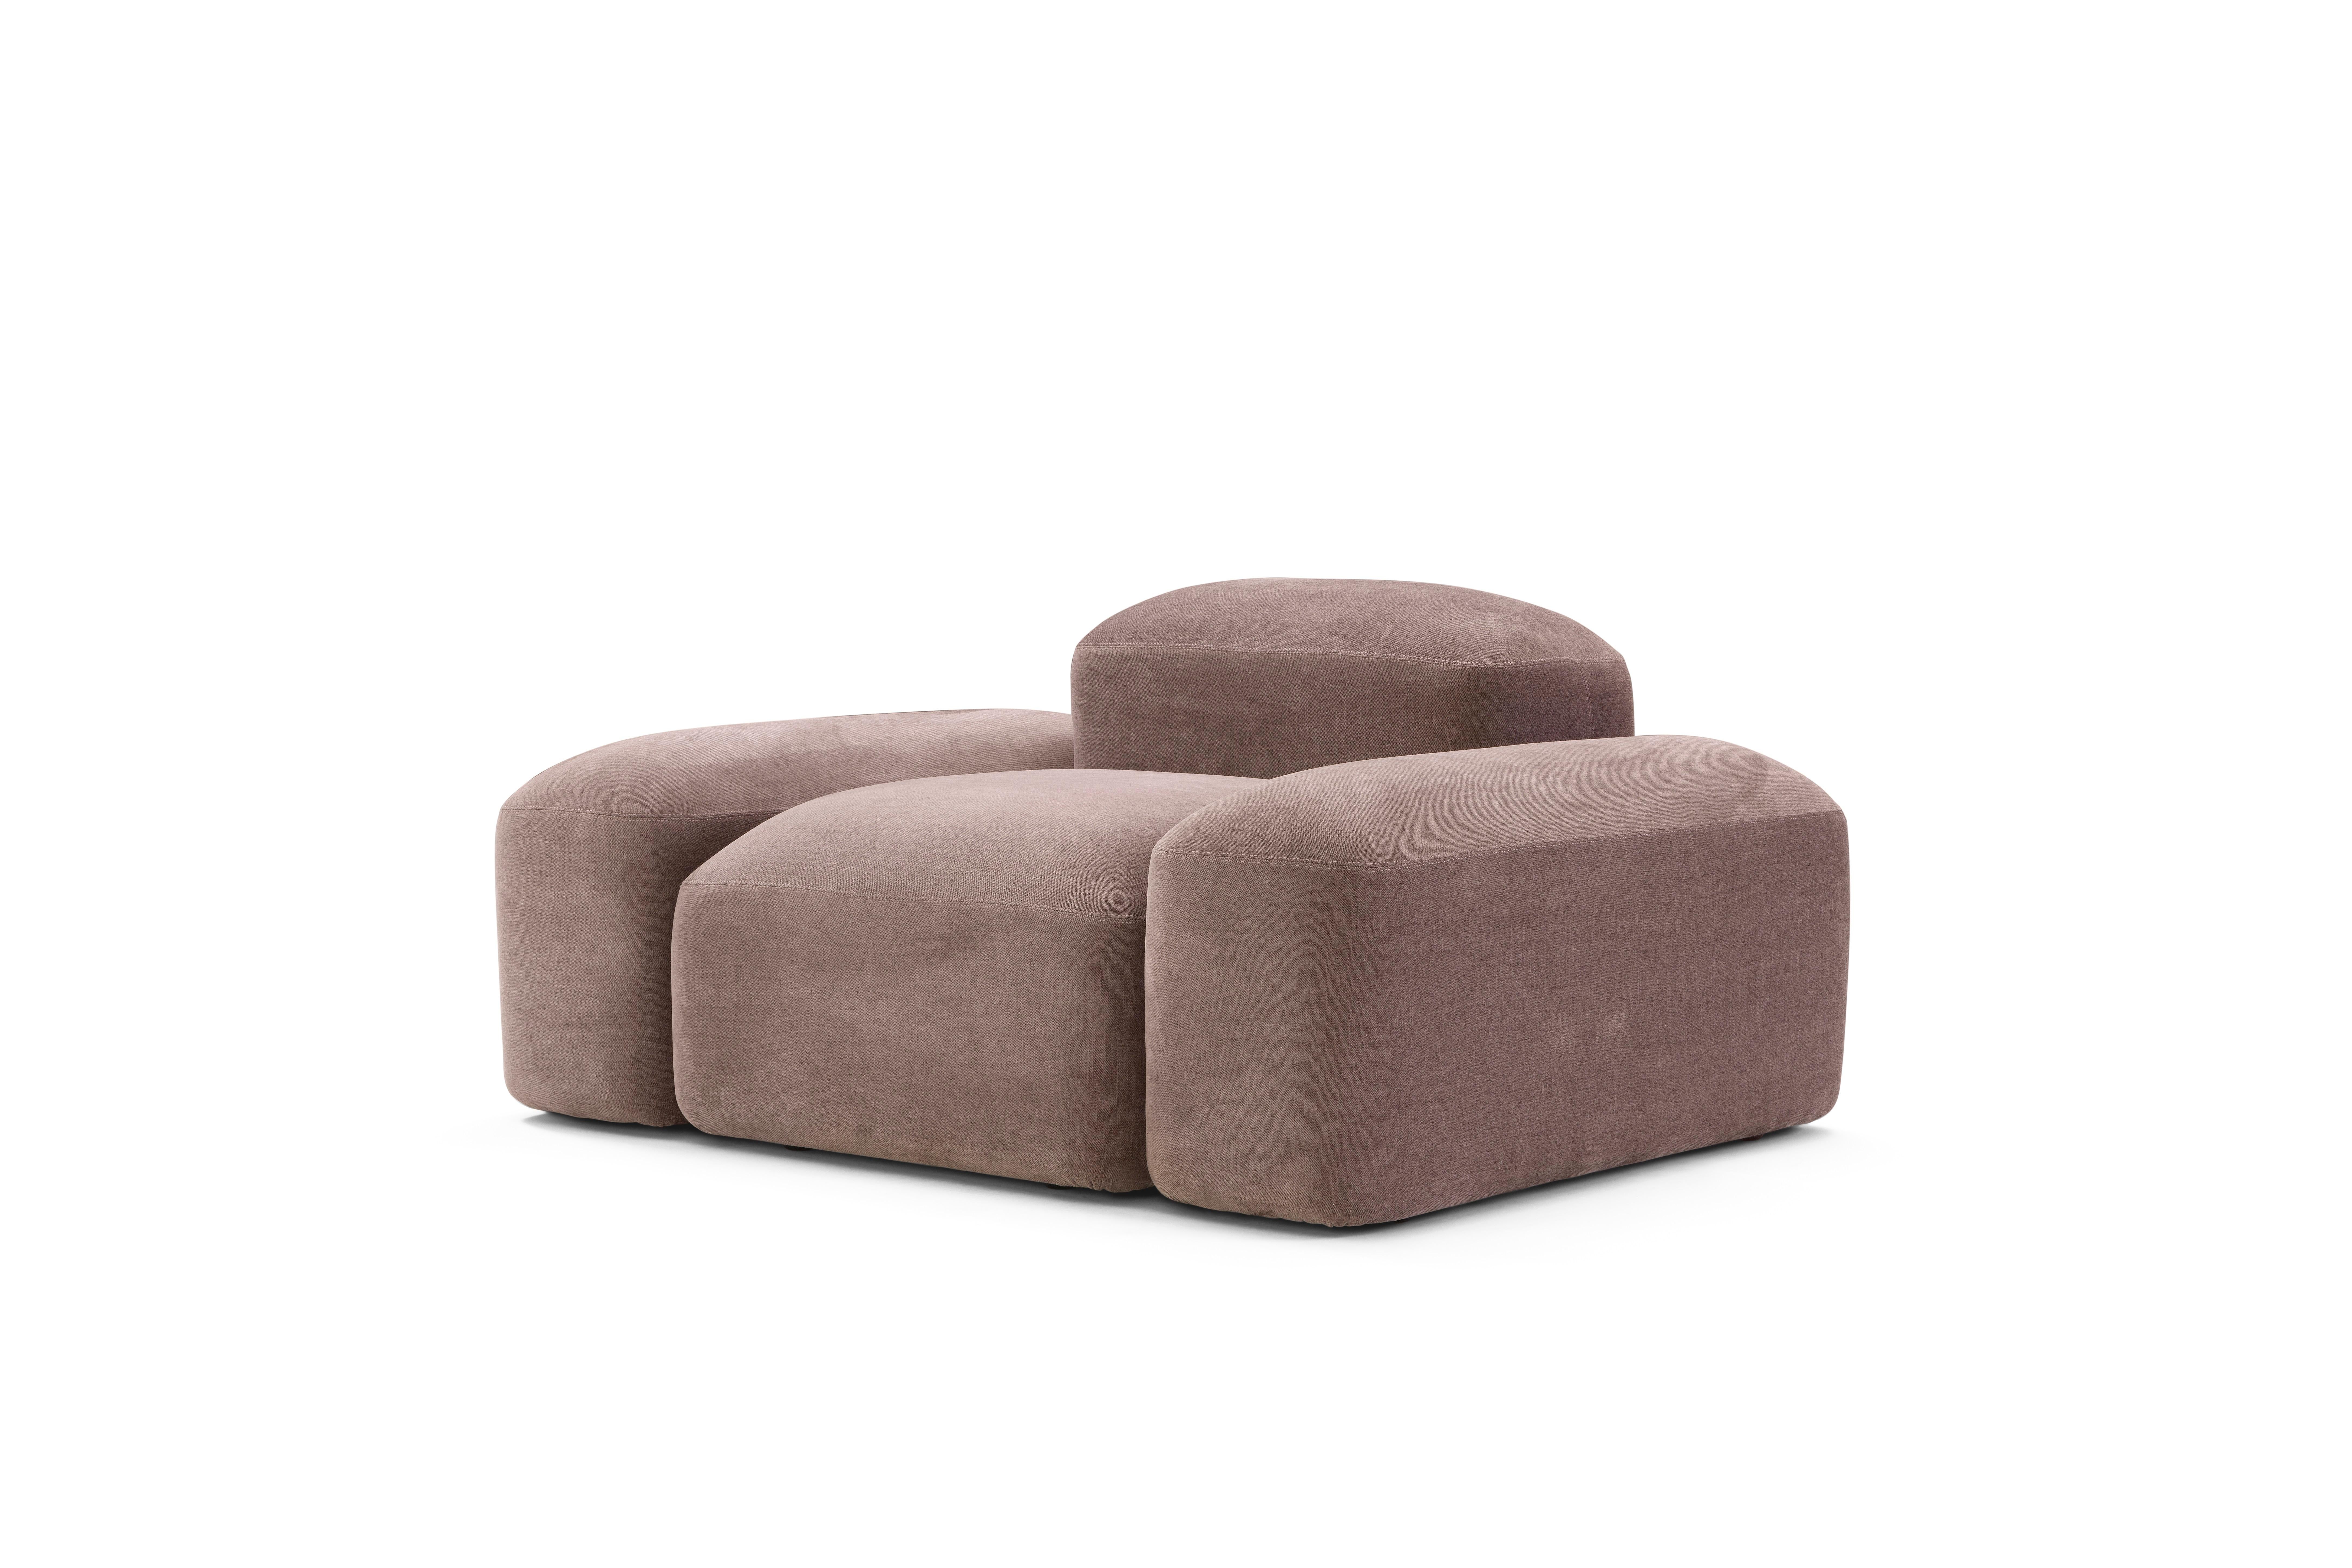 'Lapis' is a collection of sofas and seats with very organic and Minimalist shapes. 
Designer: Emanuel Gargano
Maker: Amura Lab 

'Lapis' can be made in several dimension and combinations, according to spaces and needs: from the most Classic and